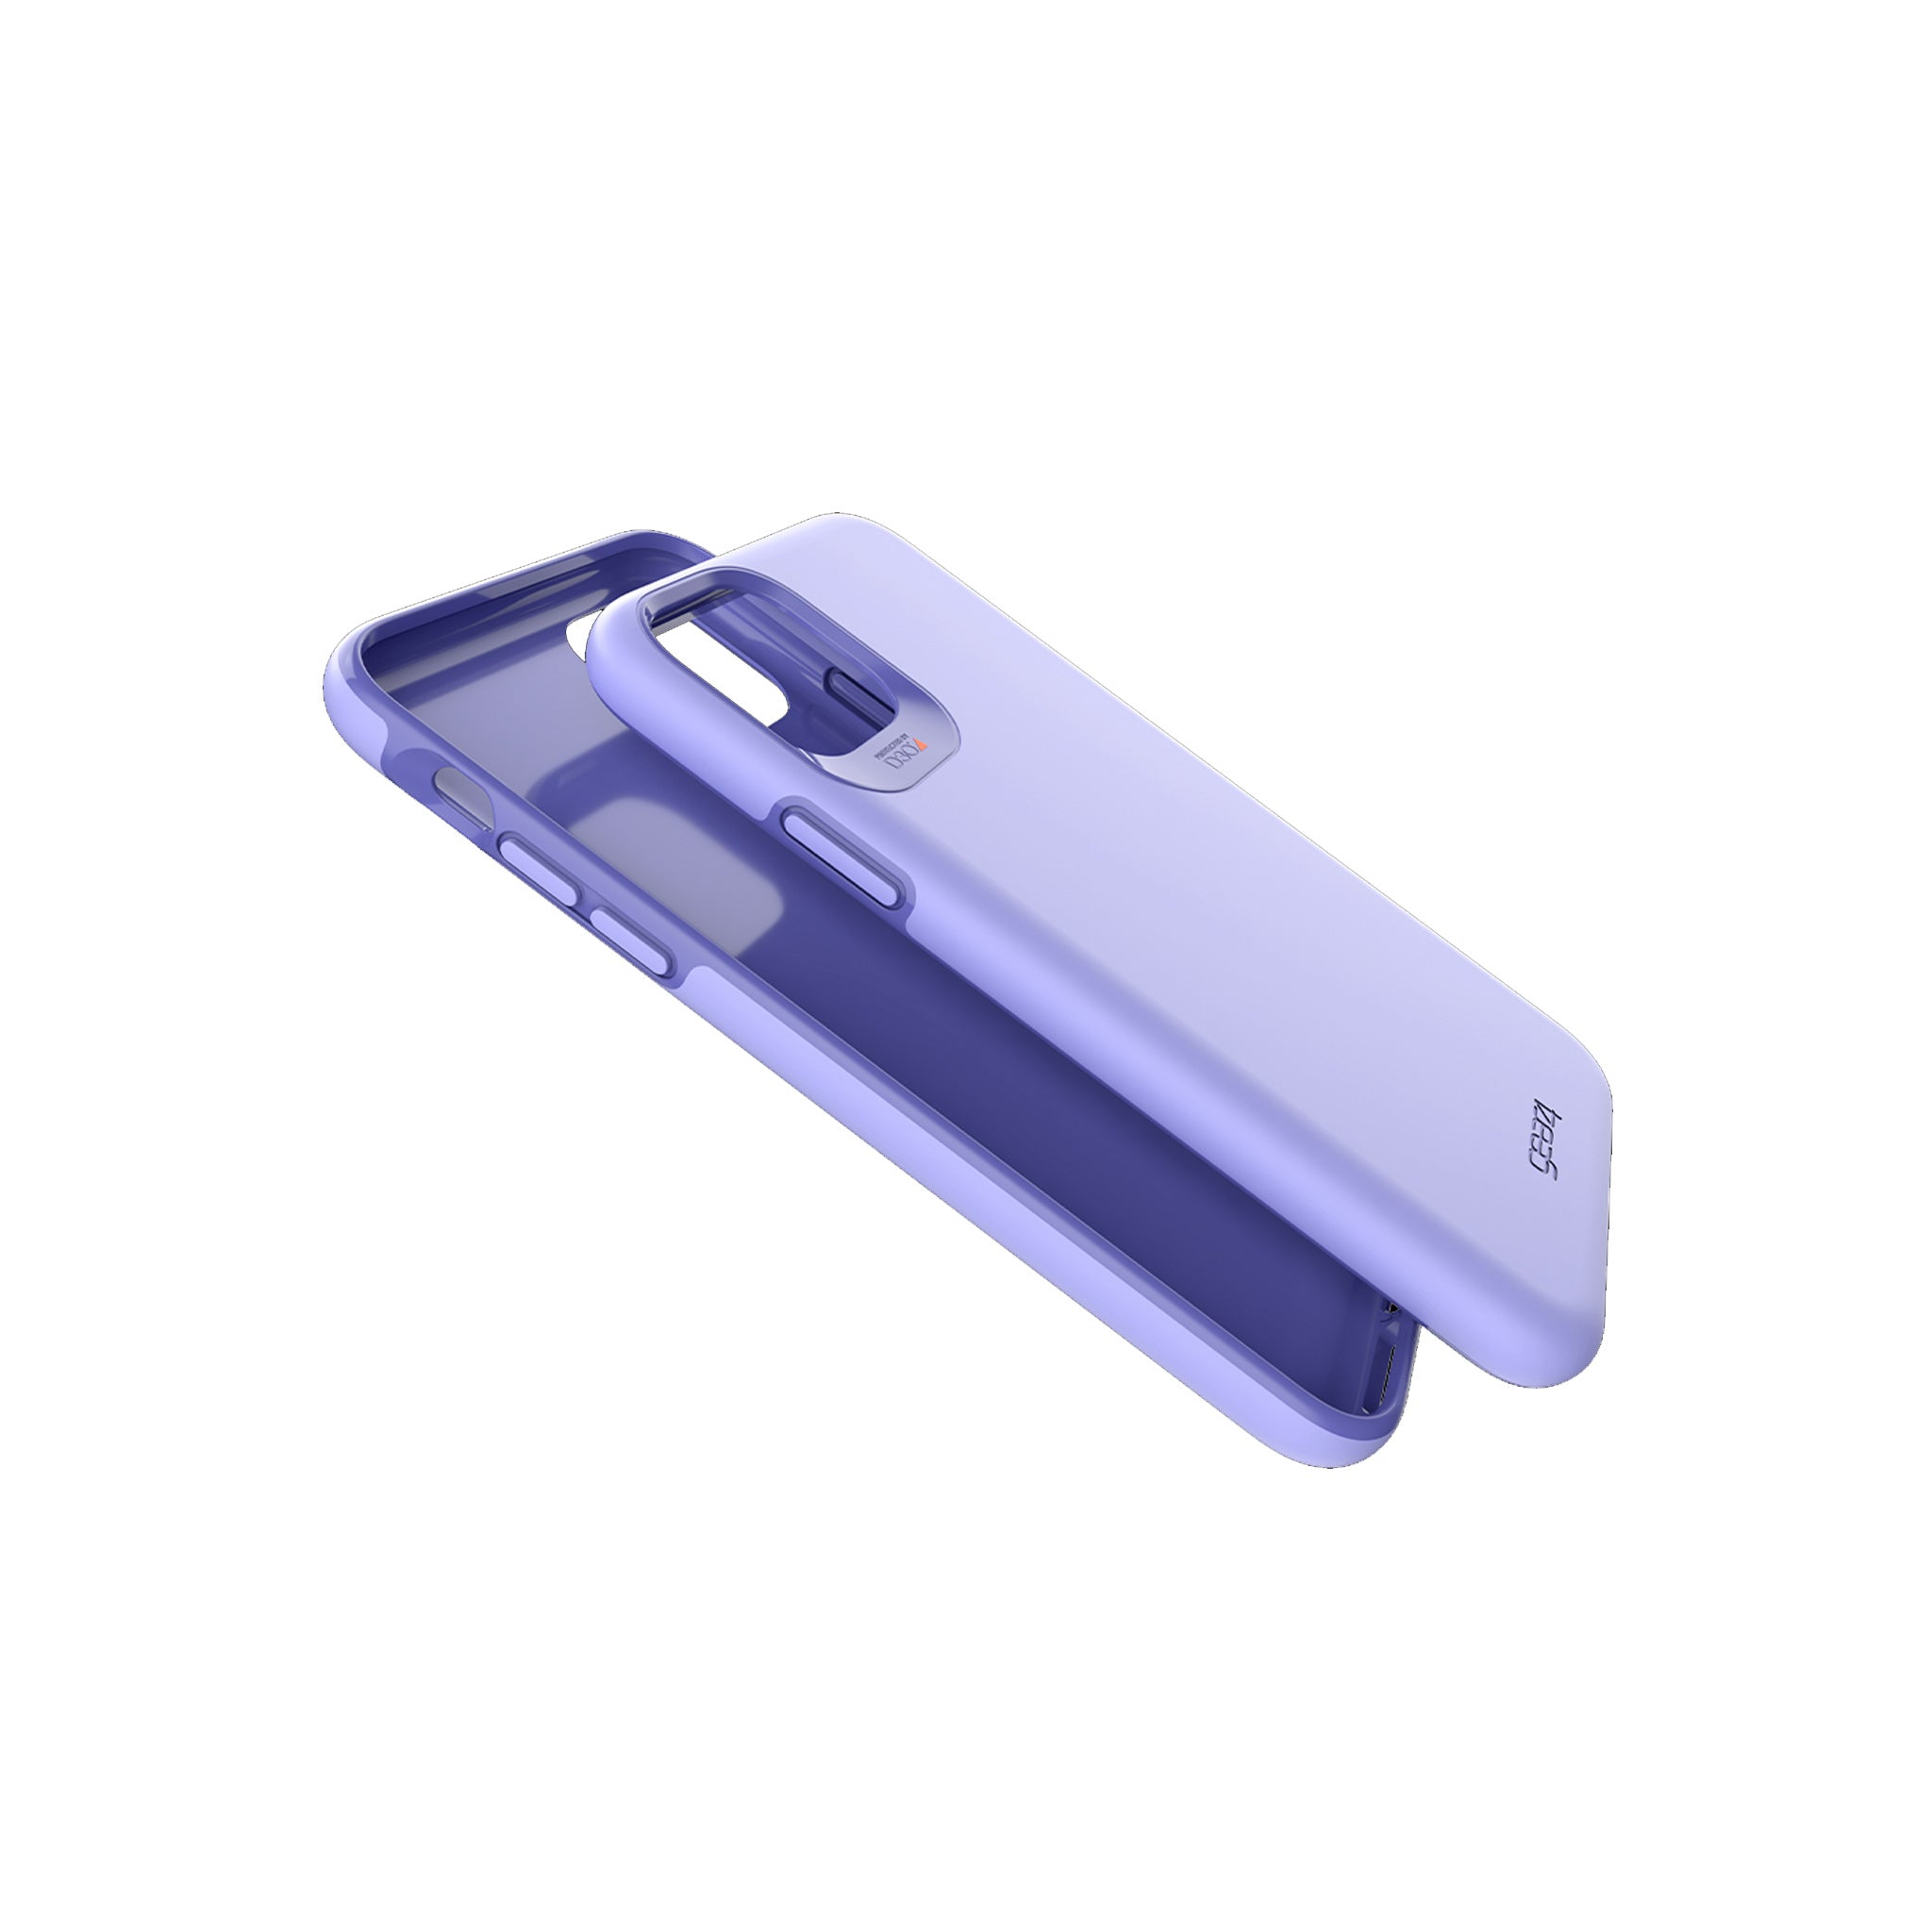 Gear4 - Holborn Case For Apple Iphone 11 Pro Max - Lilac